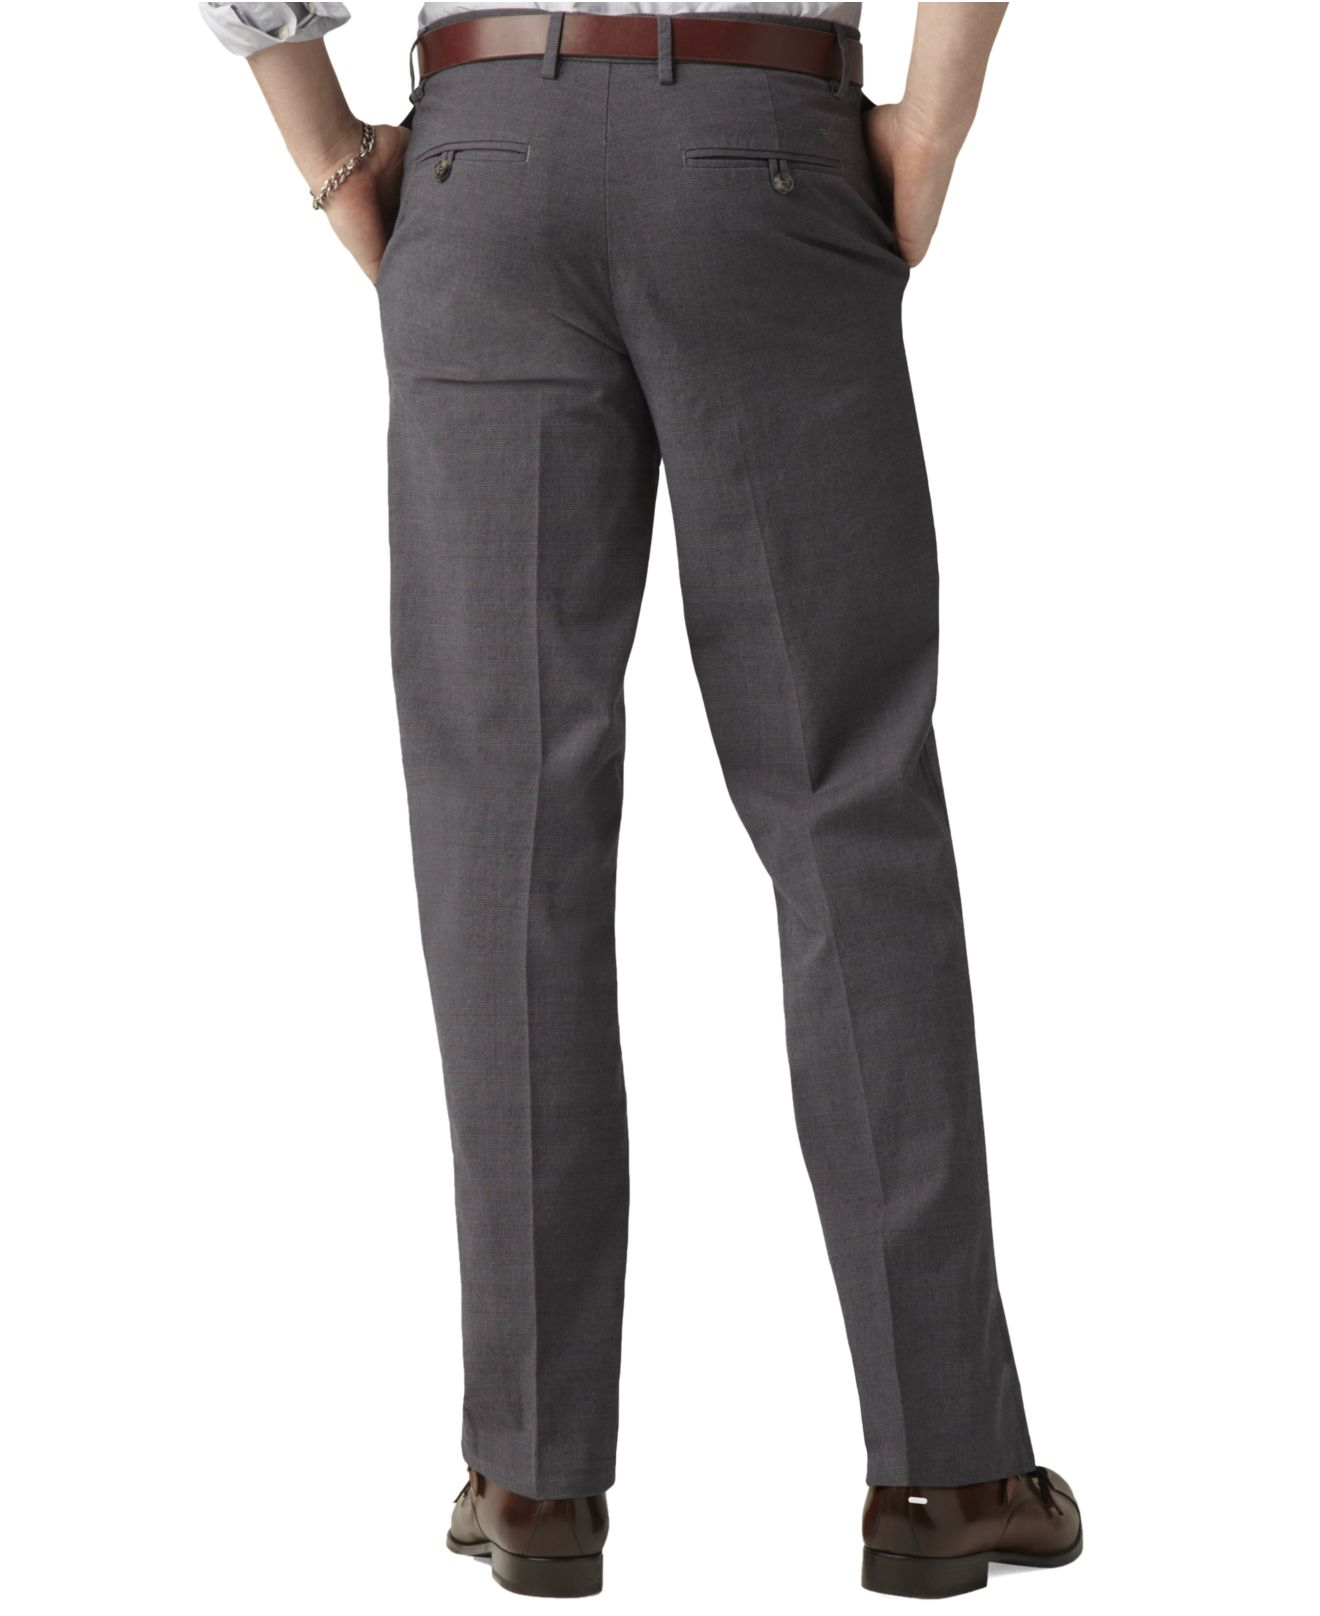 Lyst - Dockers D3 Classic Fit Iron Free Flat Front Pants in Gray for Men